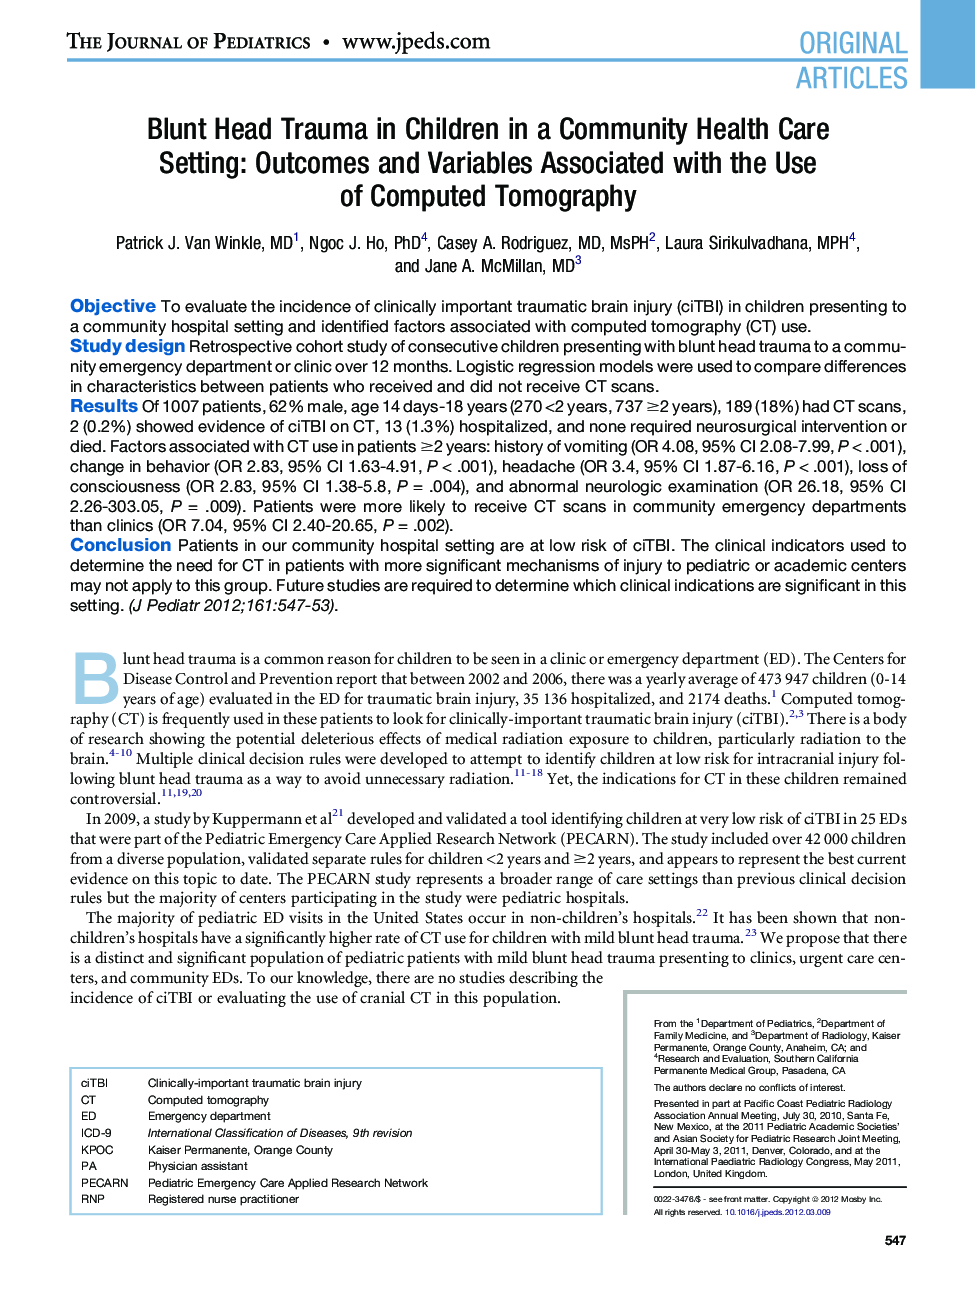 Blunt Head Trauma in Children in a Community Health Care Setting: Outcomes and Variables Associated with the Use of Computed Tomography